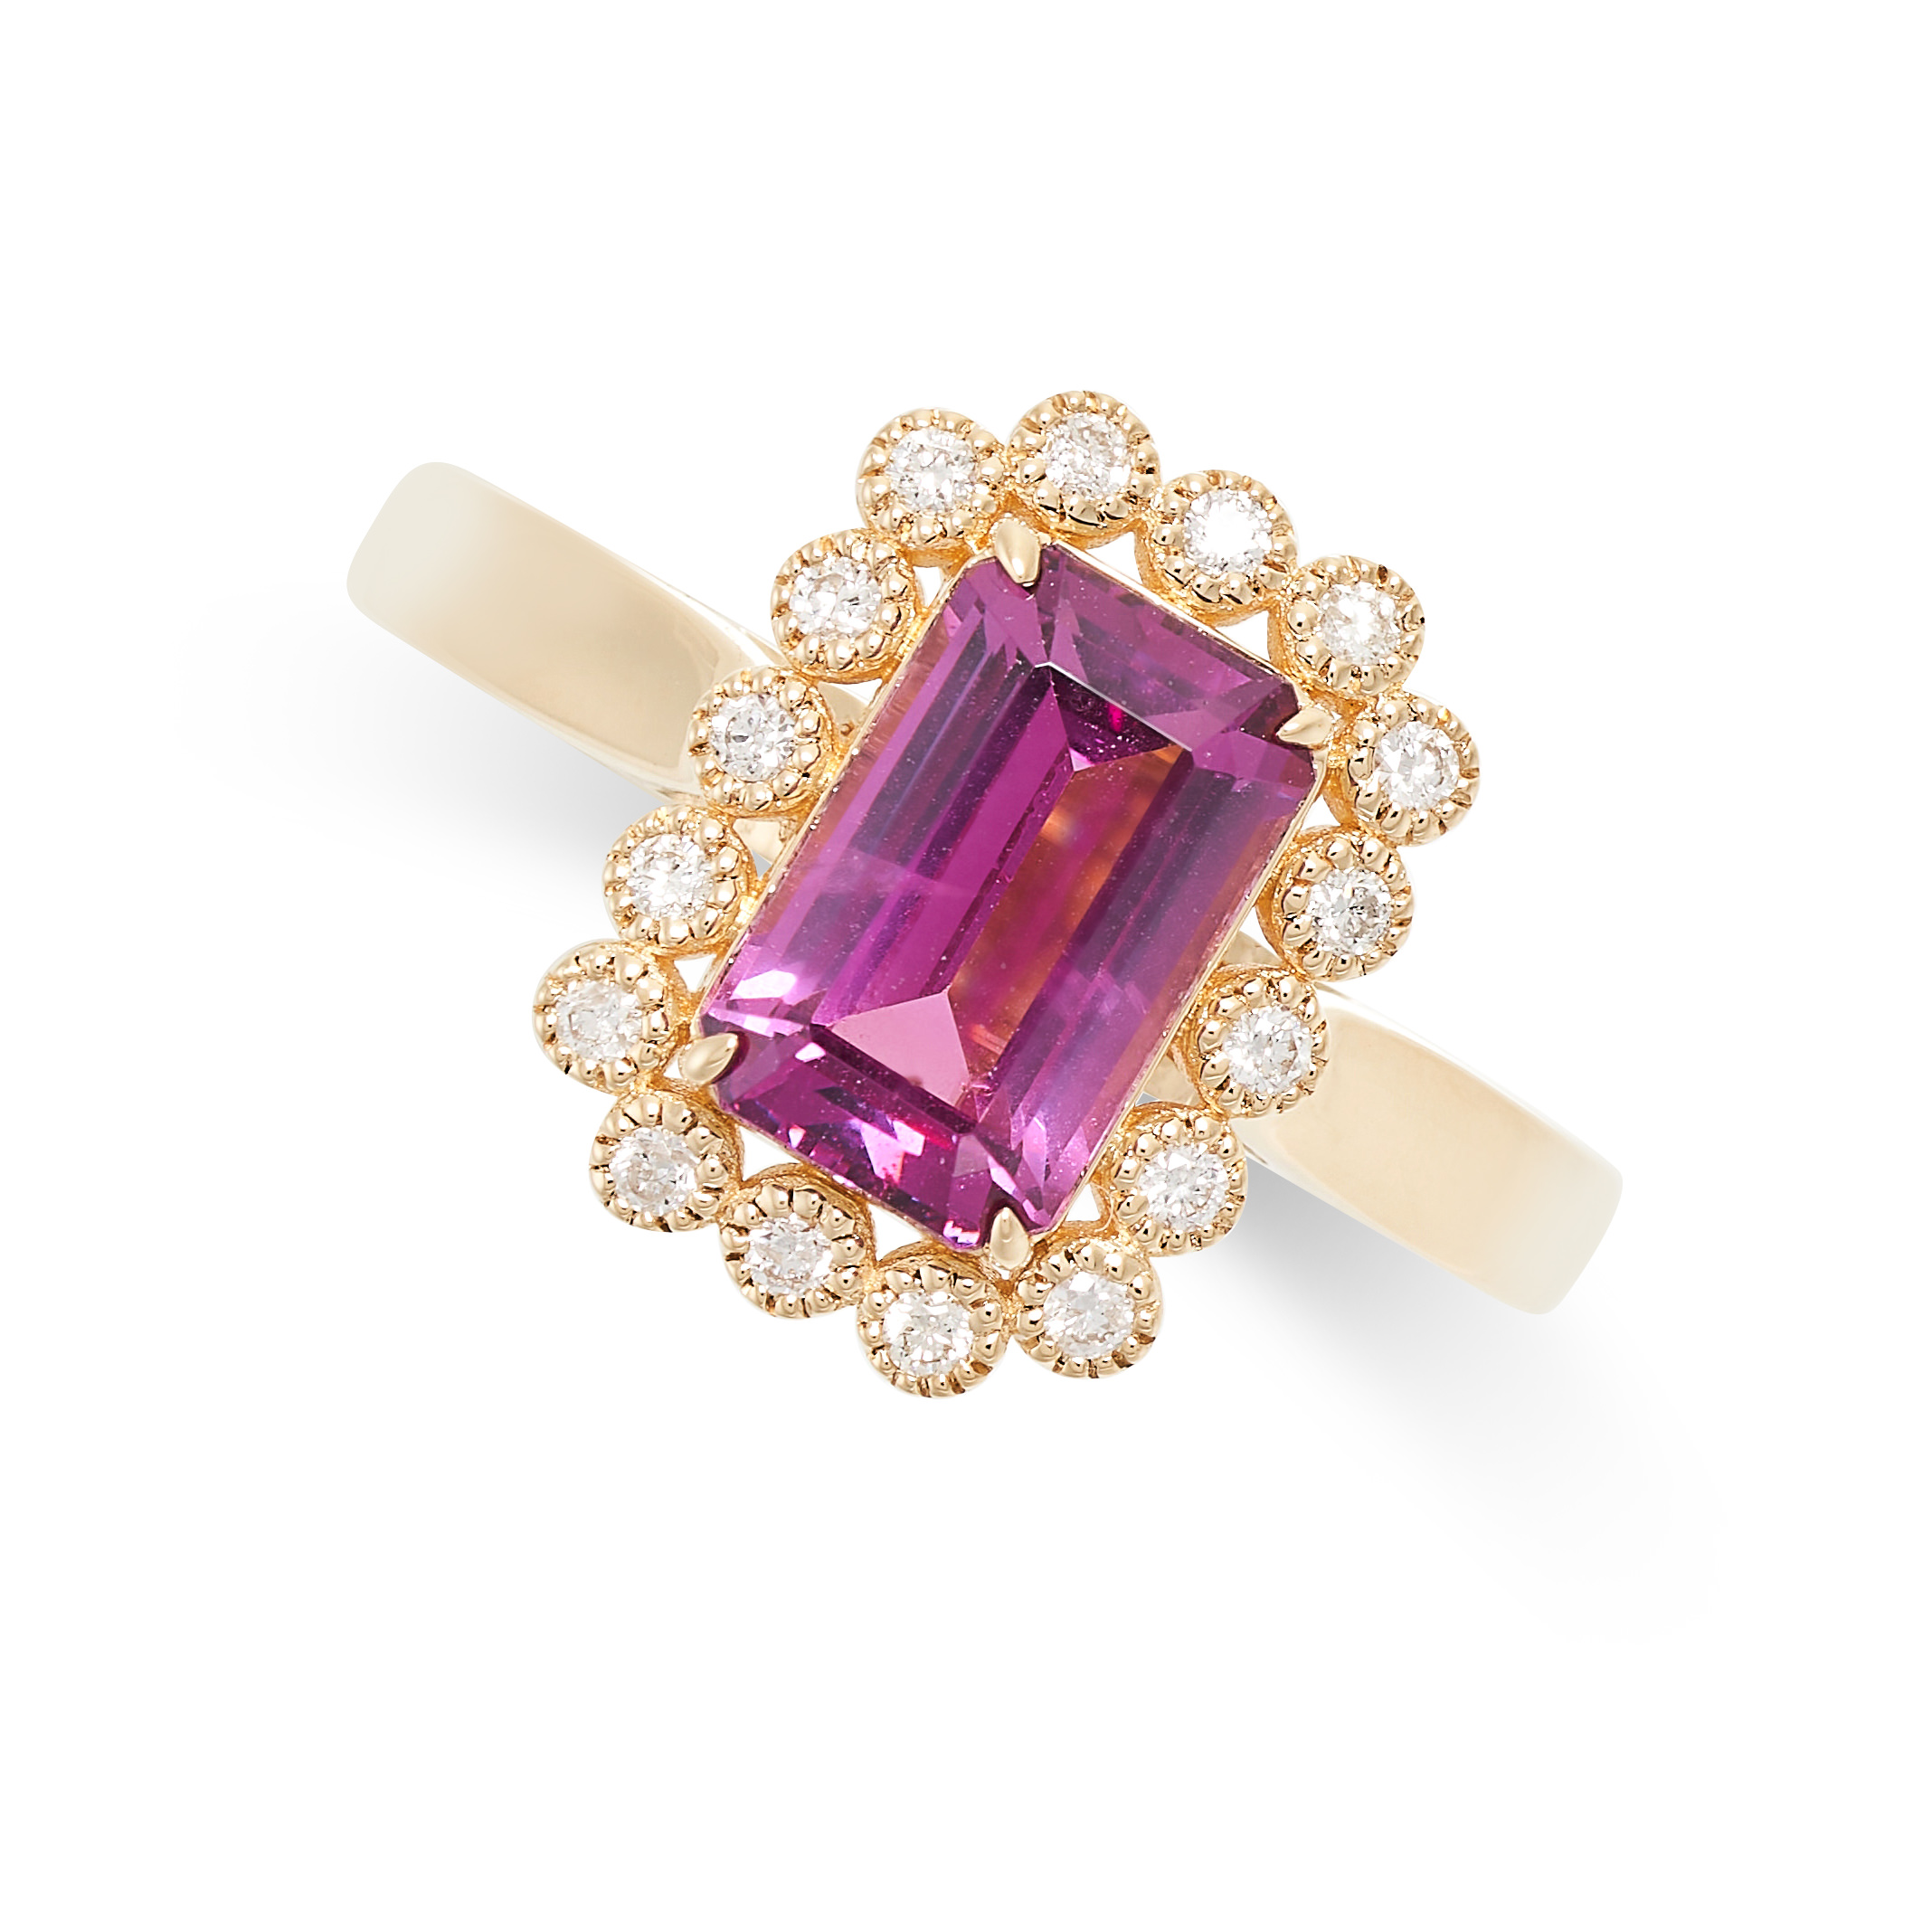 A GARNET AND DIAMOND RING in 18ct gold, set with an emerald cut garnet of 1.80 carats in a border of